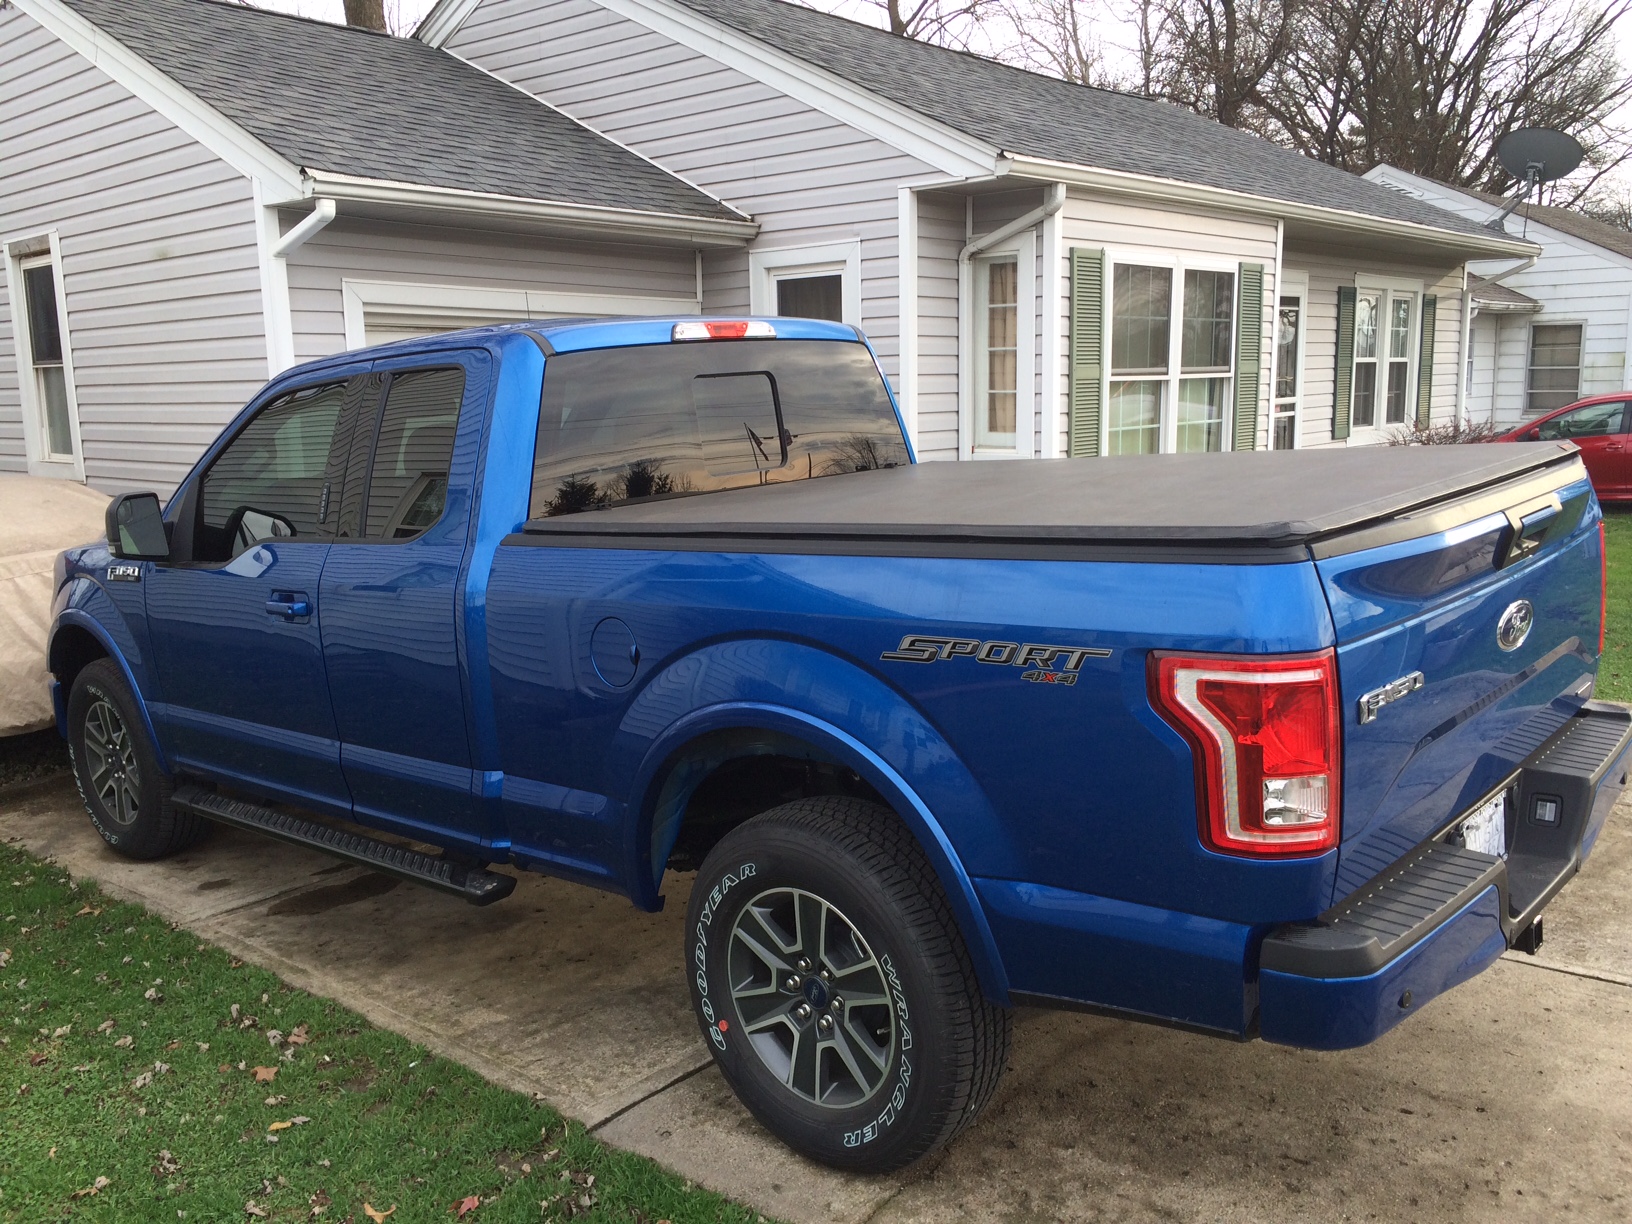 2014 Tonneau Cover On My 2016 Ford F150 Forum Community